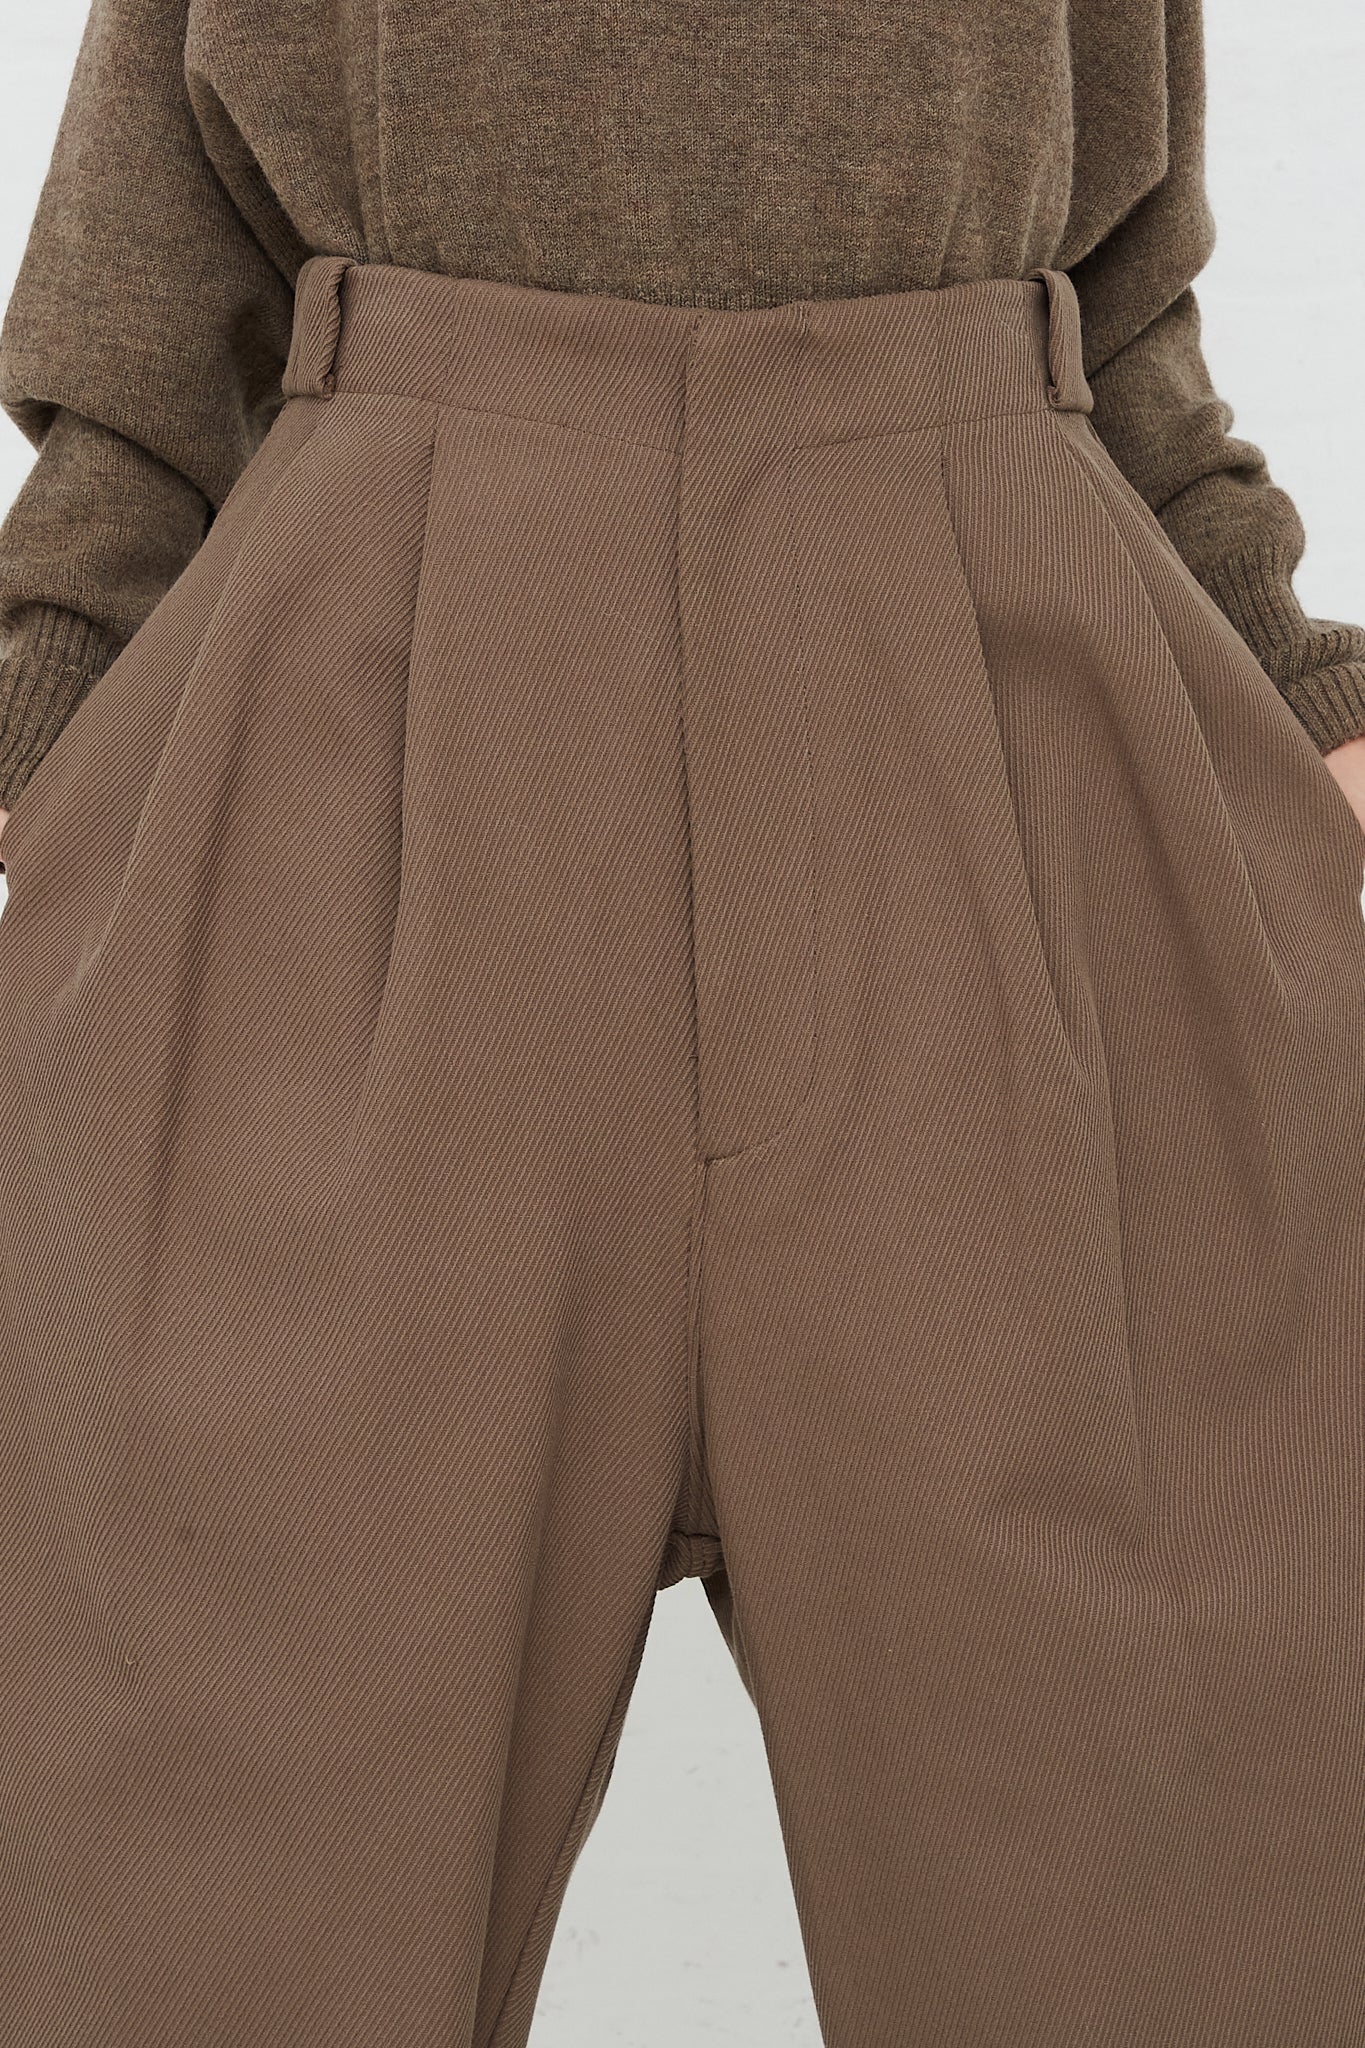 Relaxed Twill Trouser in Cotton by Lauren Manoogian for Oroboro Front Upclose